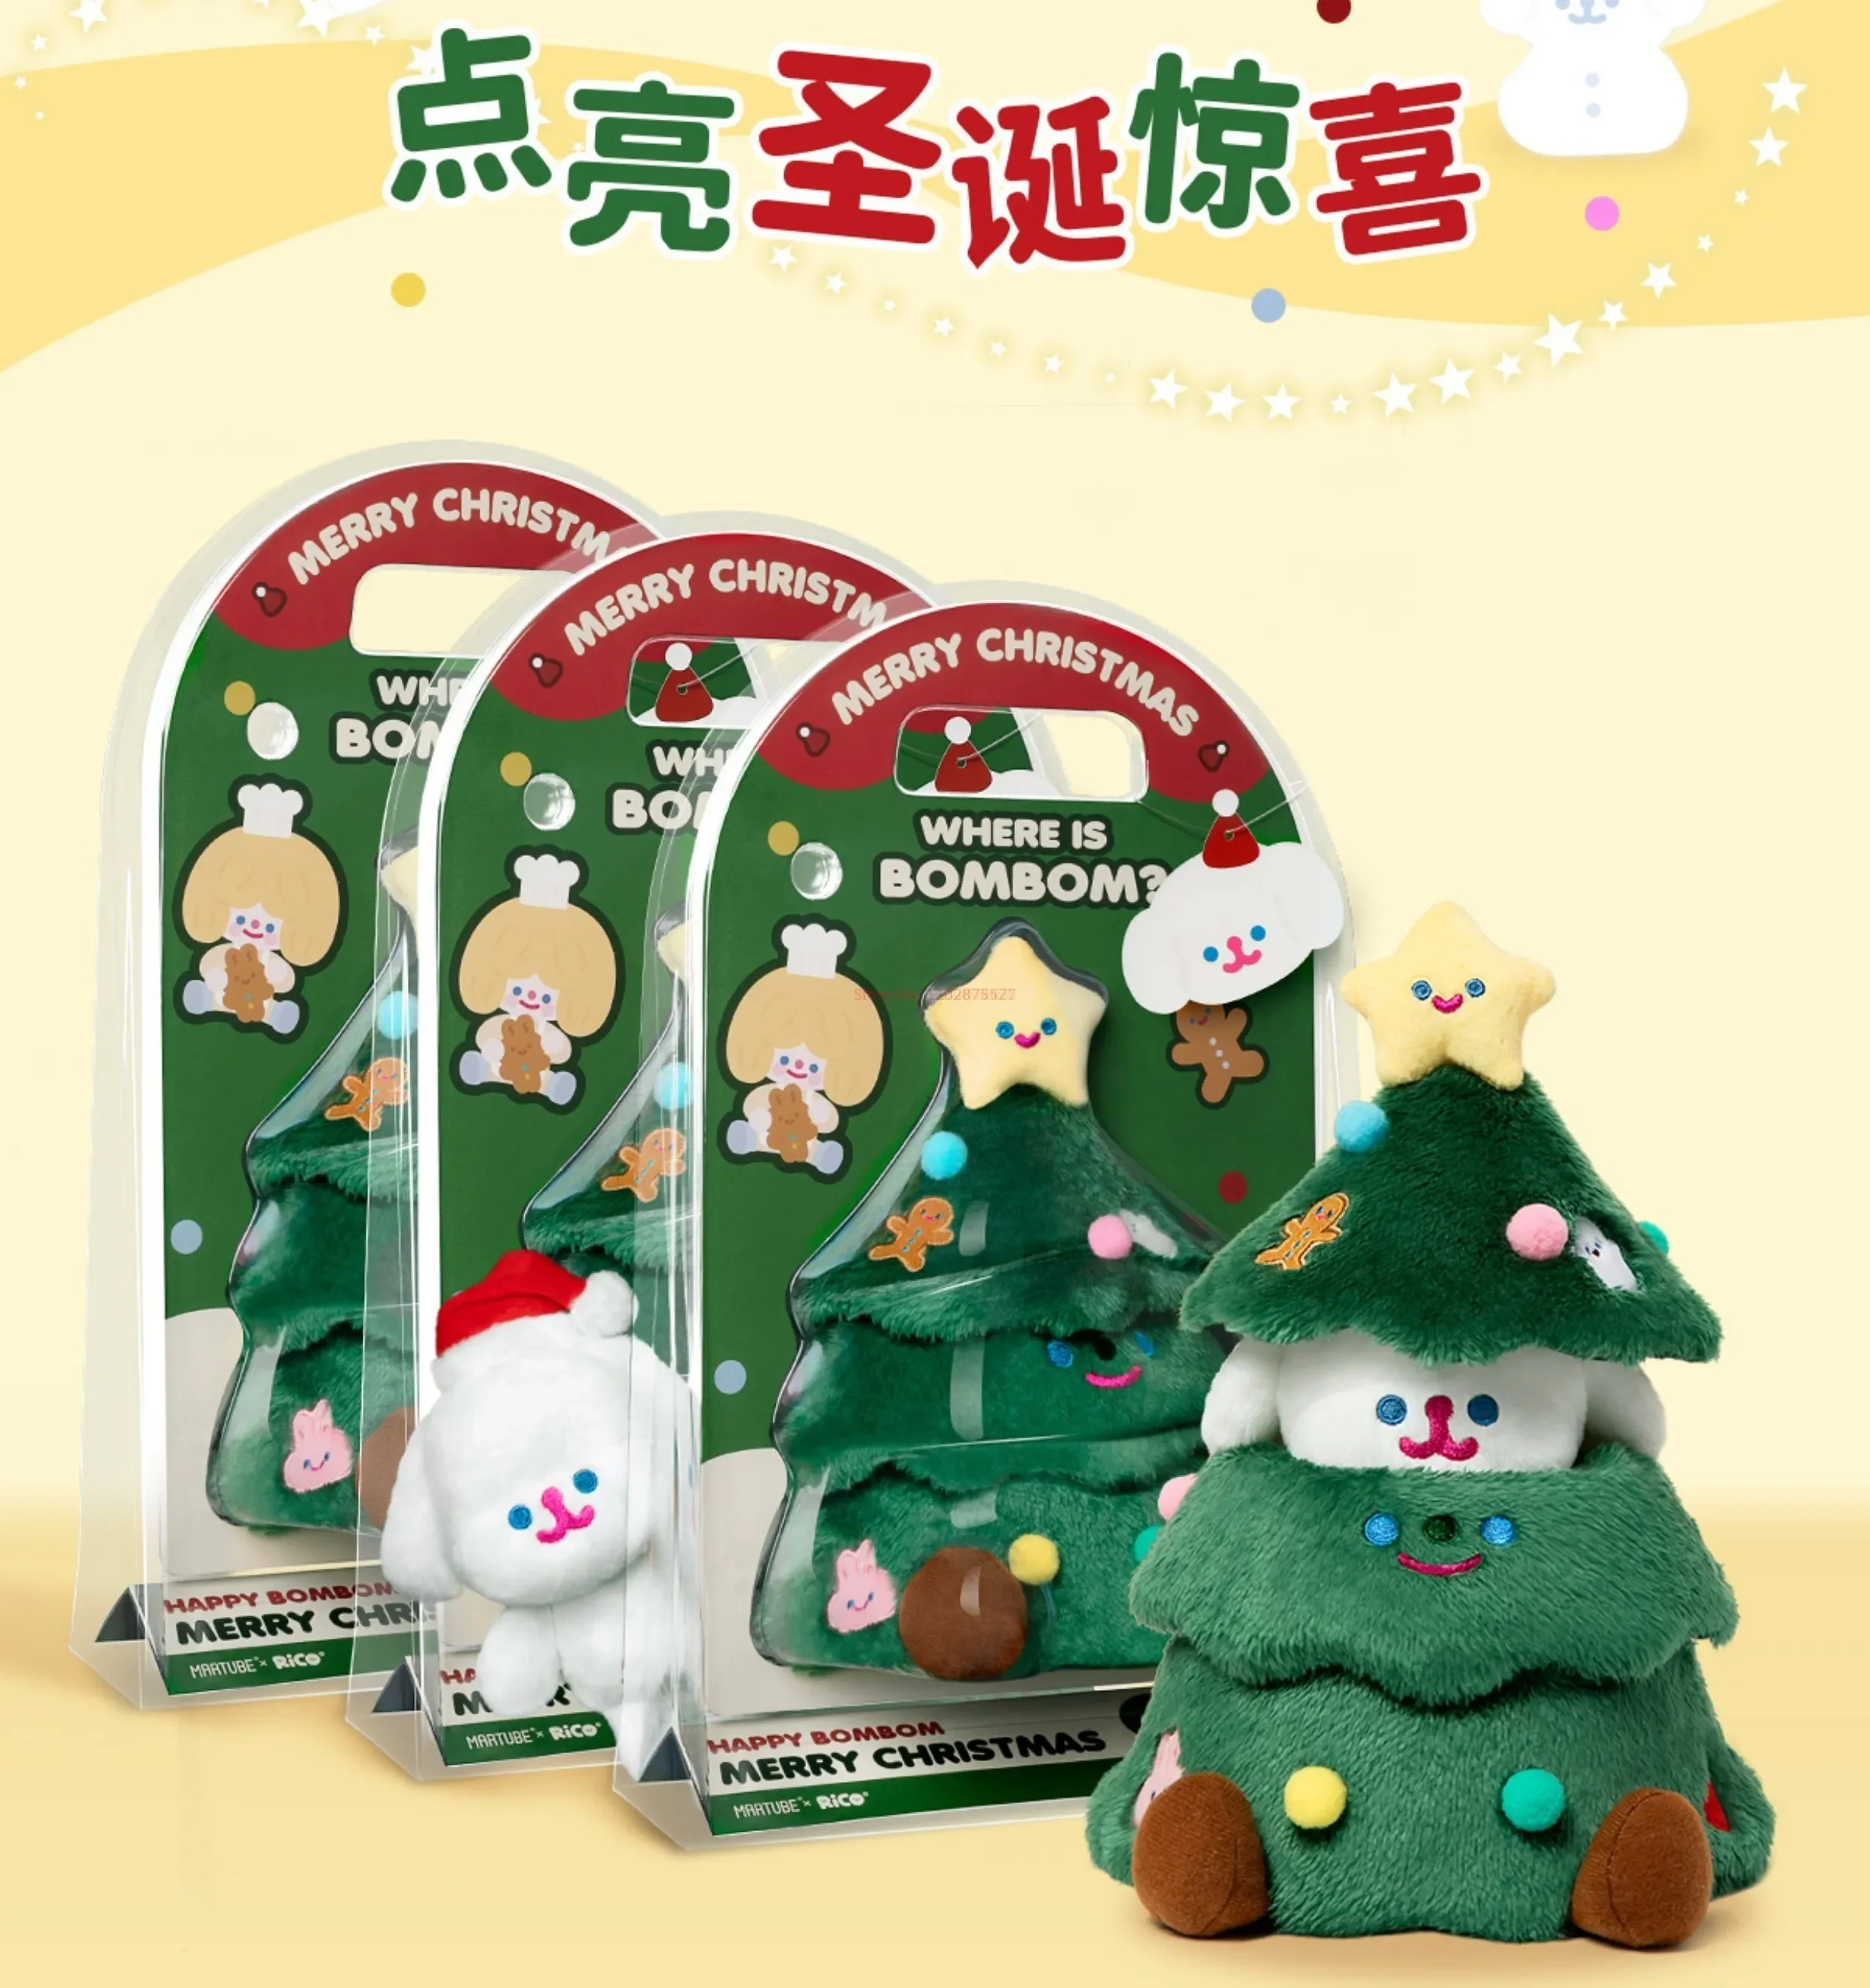 

Christmas Tree Rico Plush Doll Soft Anime Peripheral Lovely Merry Christmas Room Decoration Christmas Cute Gifts